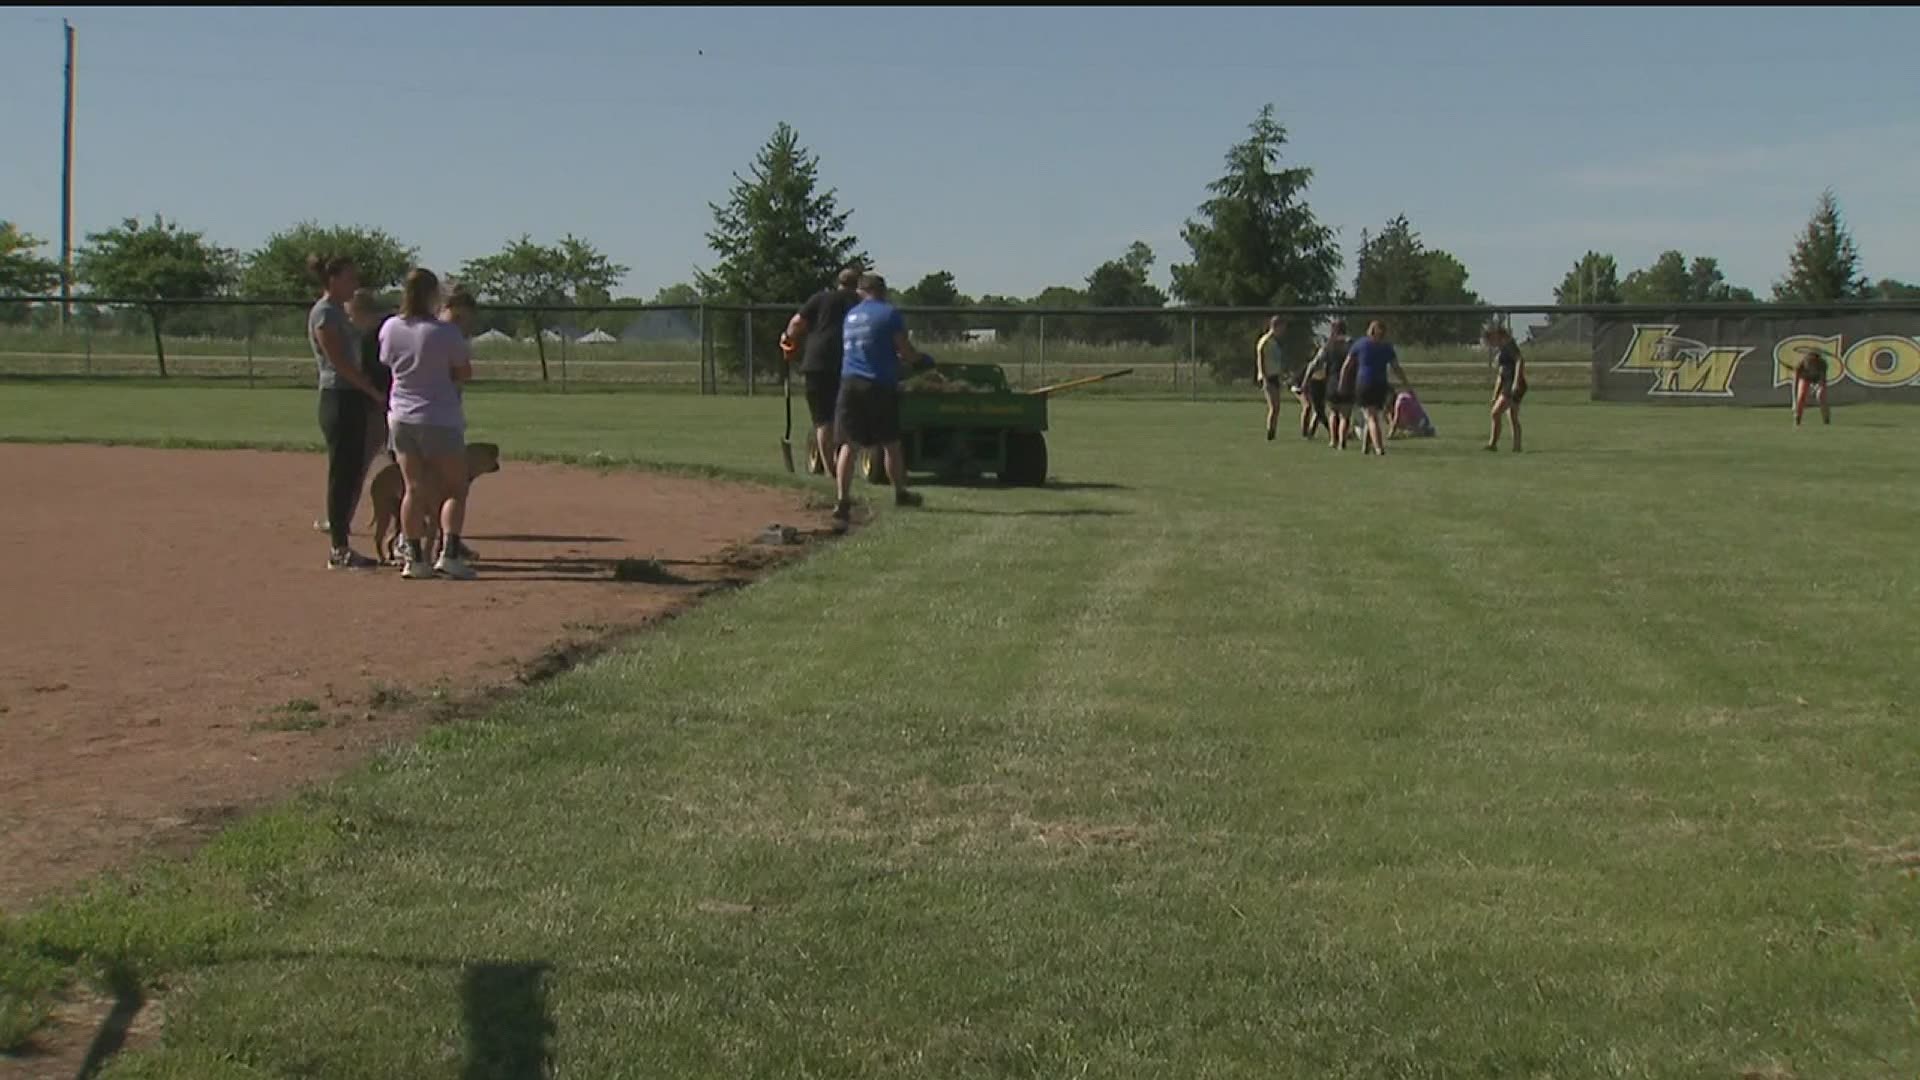 Players, Coaches and Parents help get the softball field ready to play at Louisa-Muscatine.